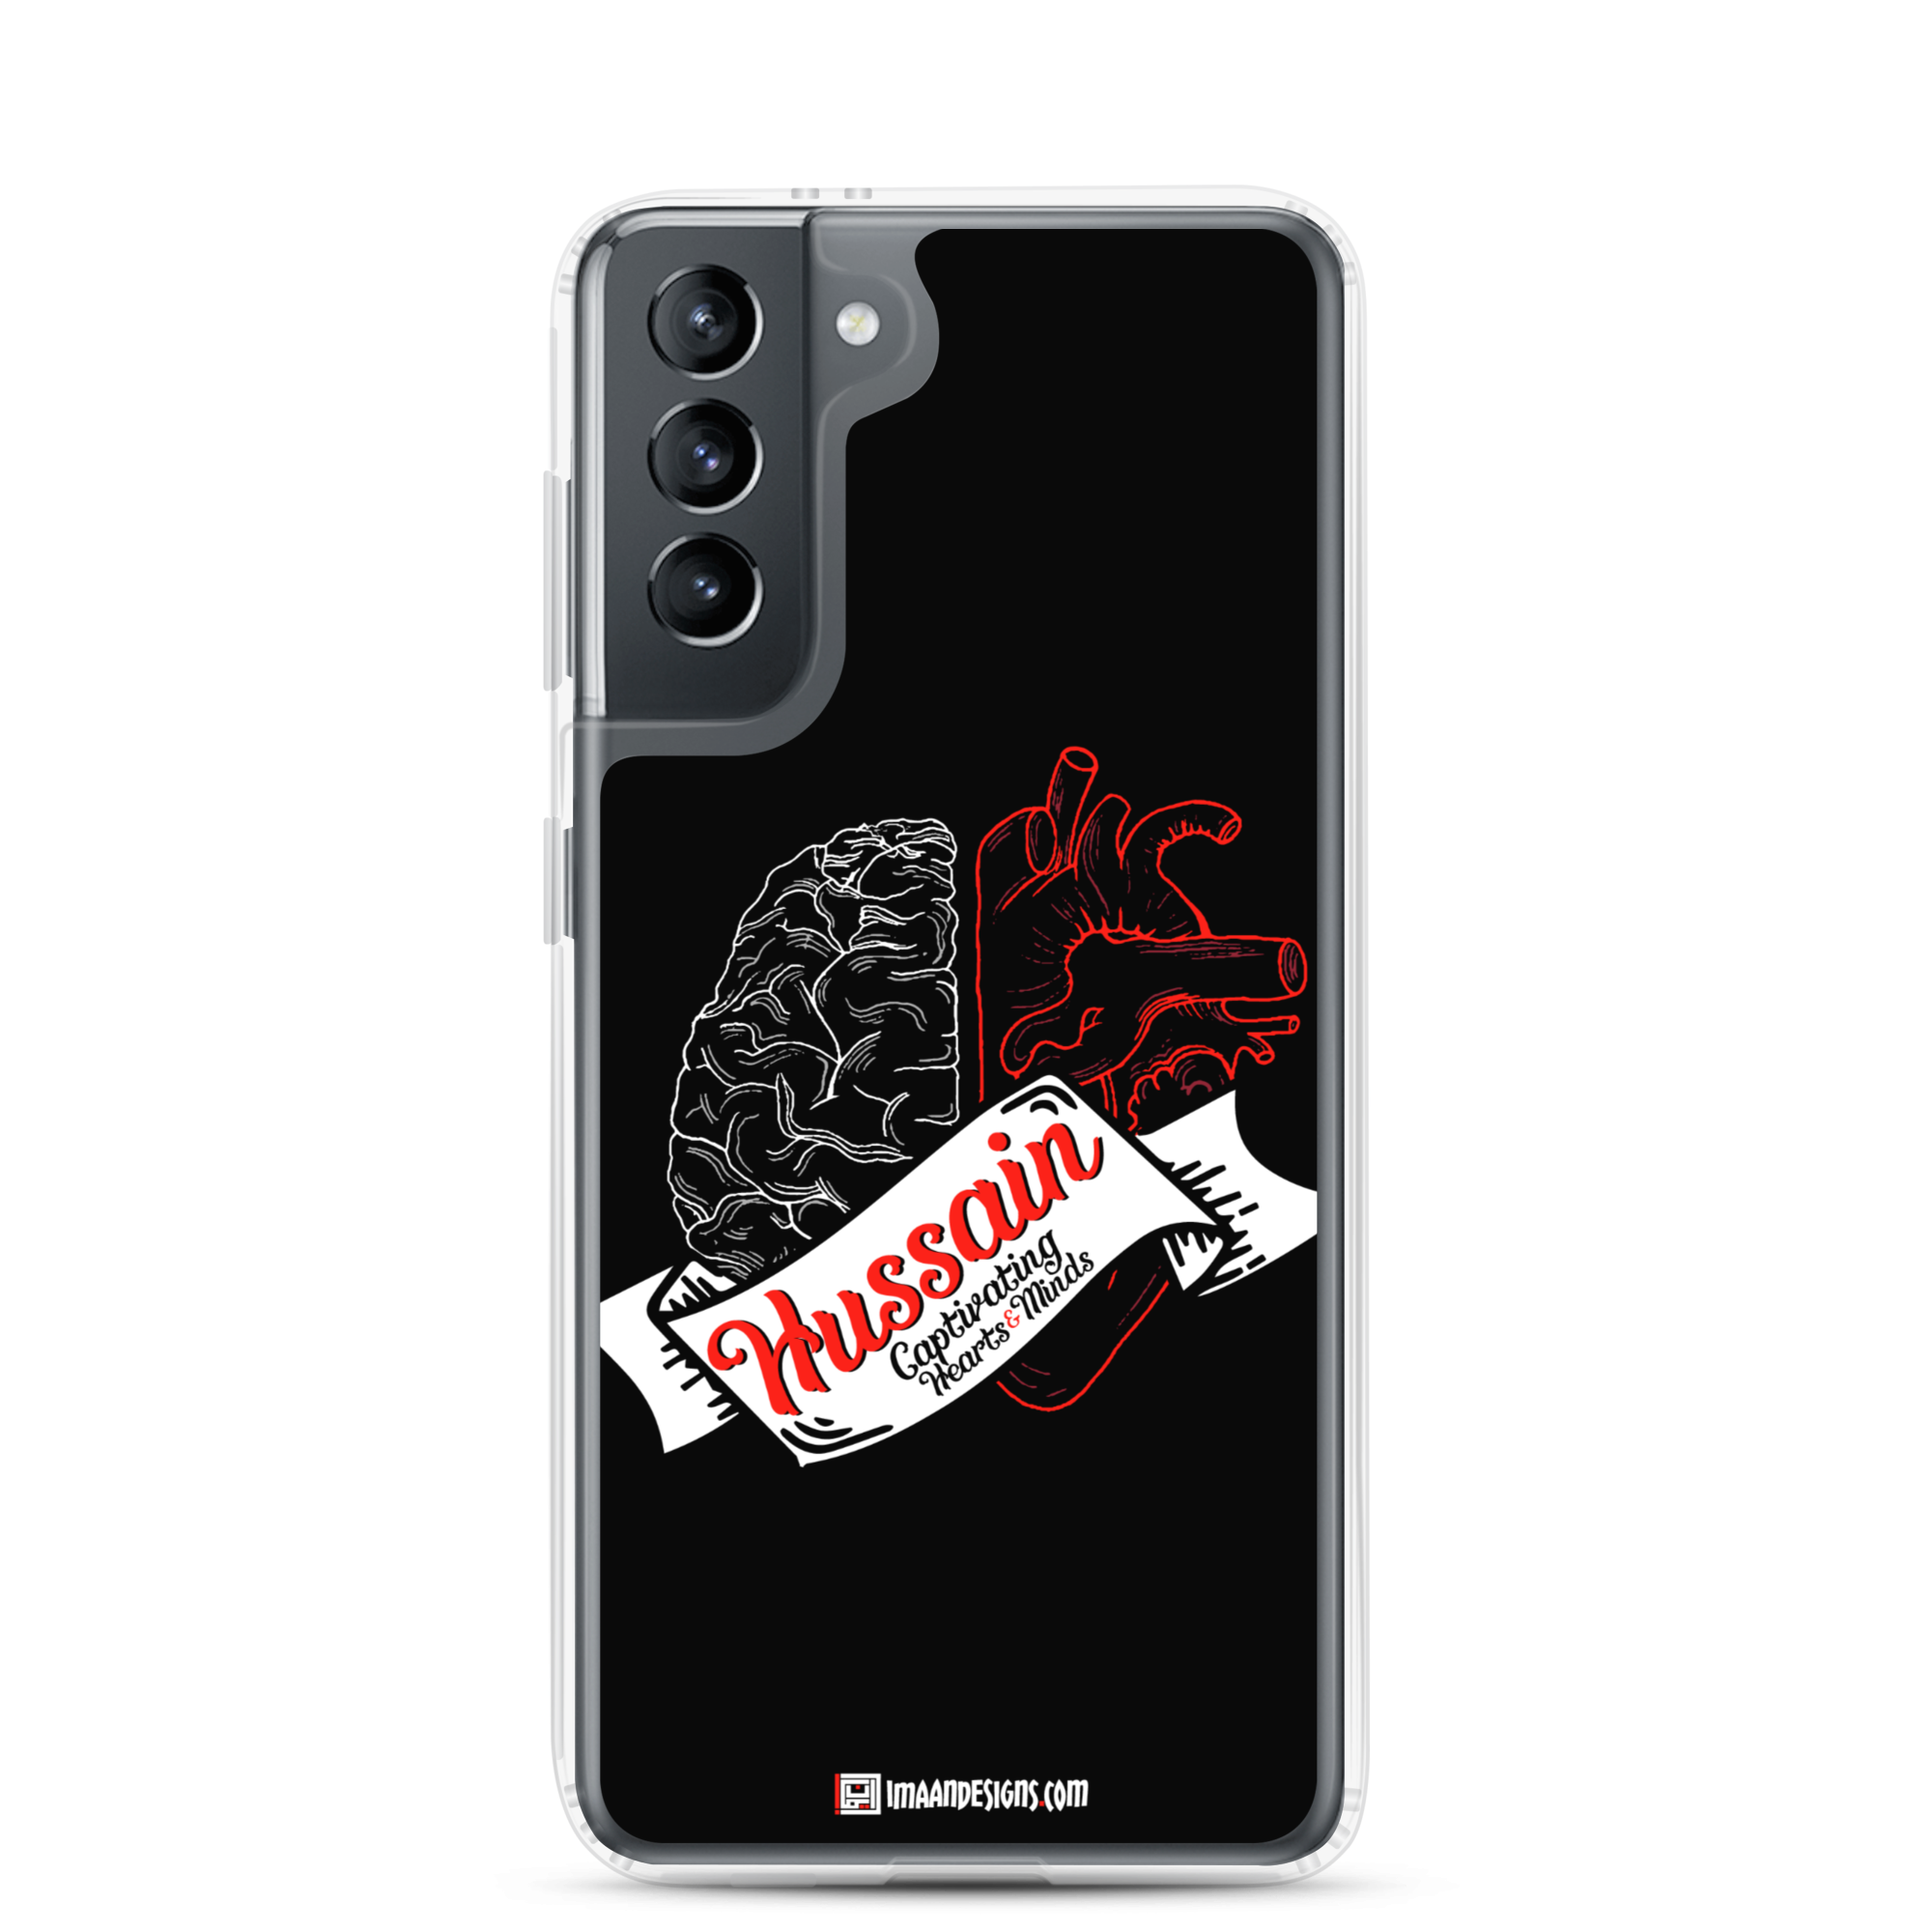 Hearts and Minds - Samsung Case